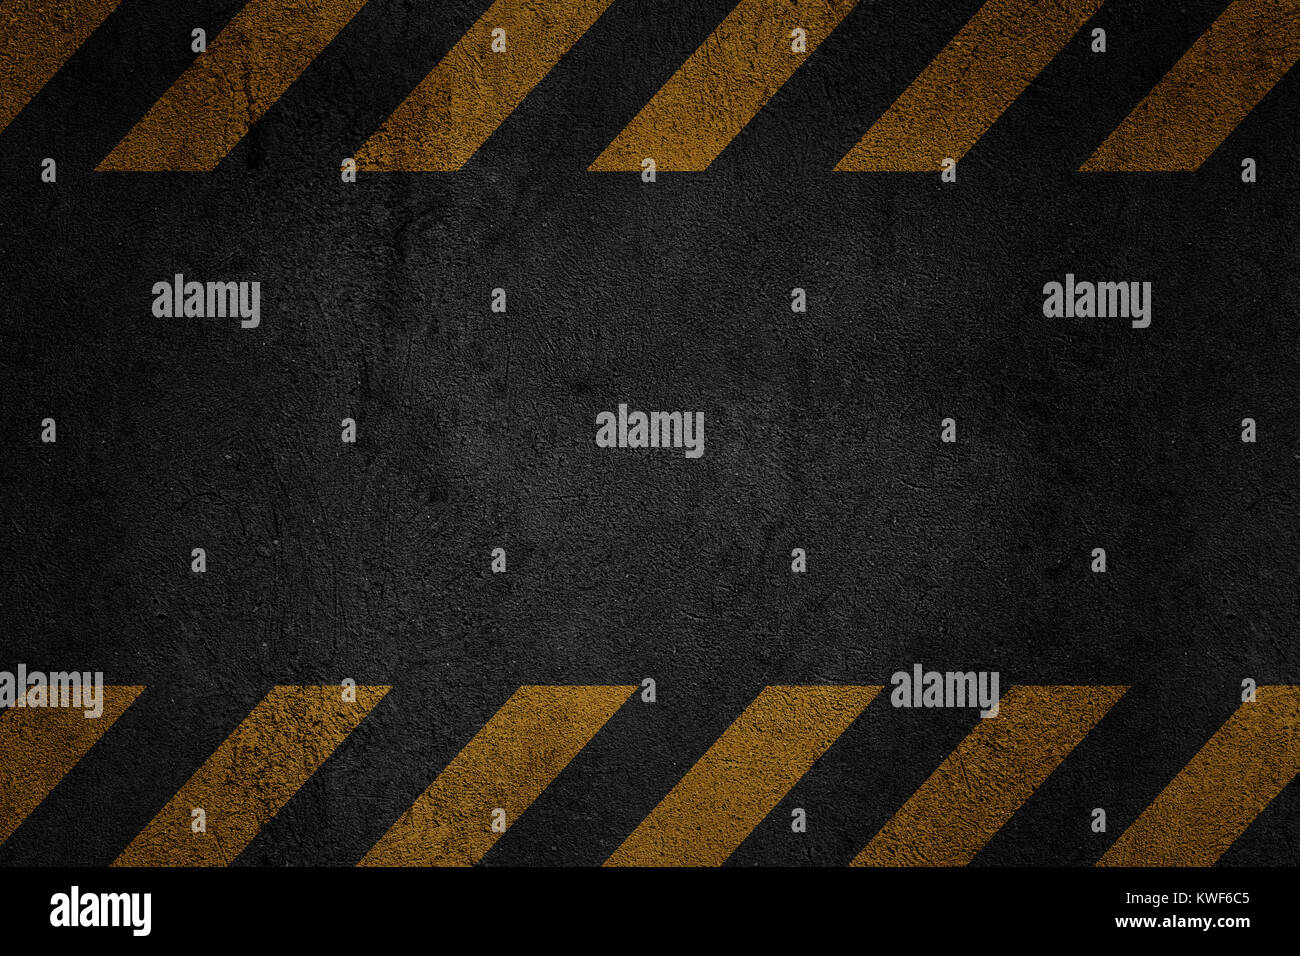 Old black grungy metal plate surface with yellow warning stripes. Building, construction. Banner, place for text. Stock Photo